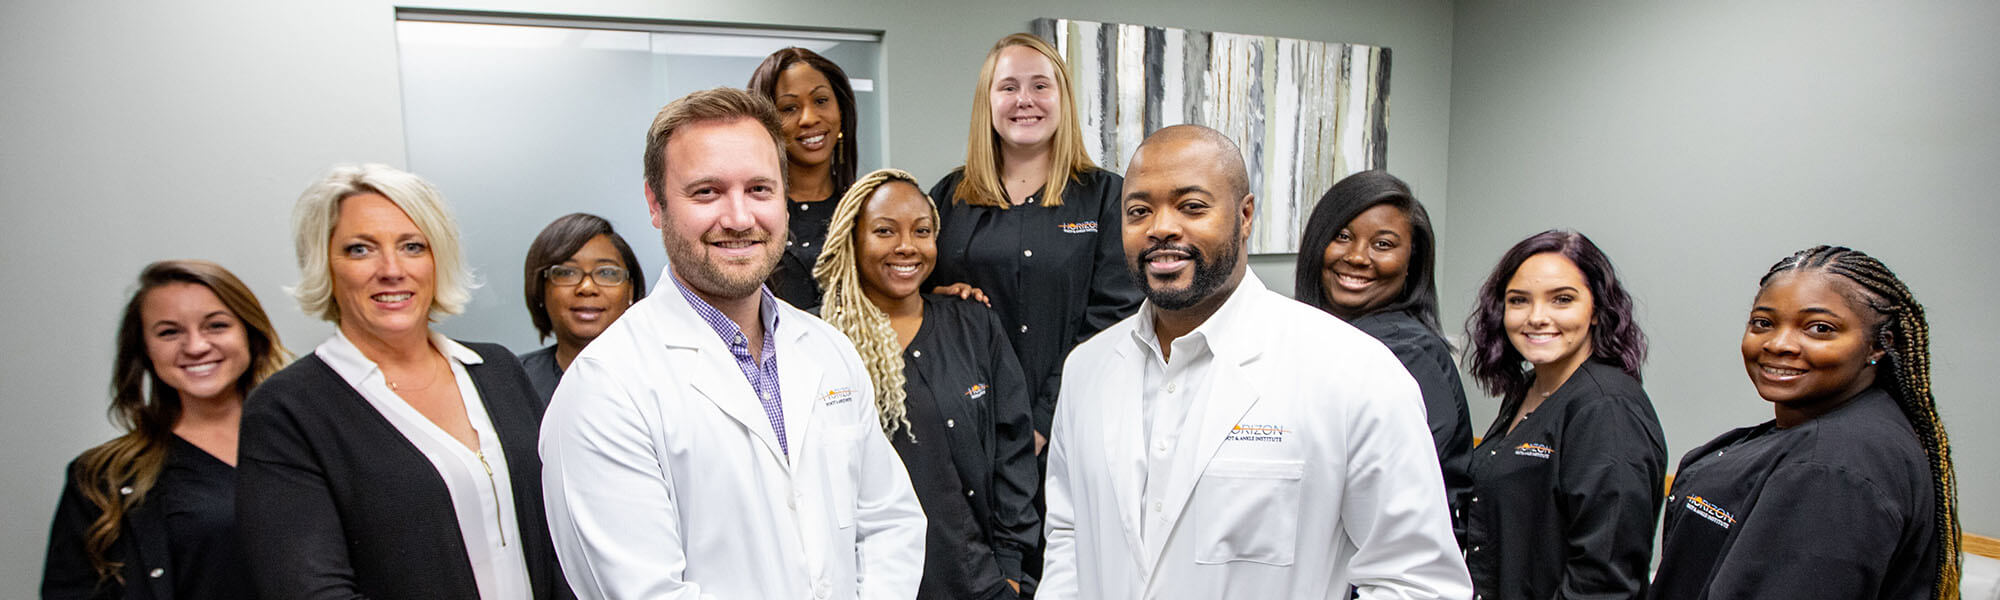 Team of doctors, practitioners & staff of Horizon Foot & Ankle. St. Louis, MO